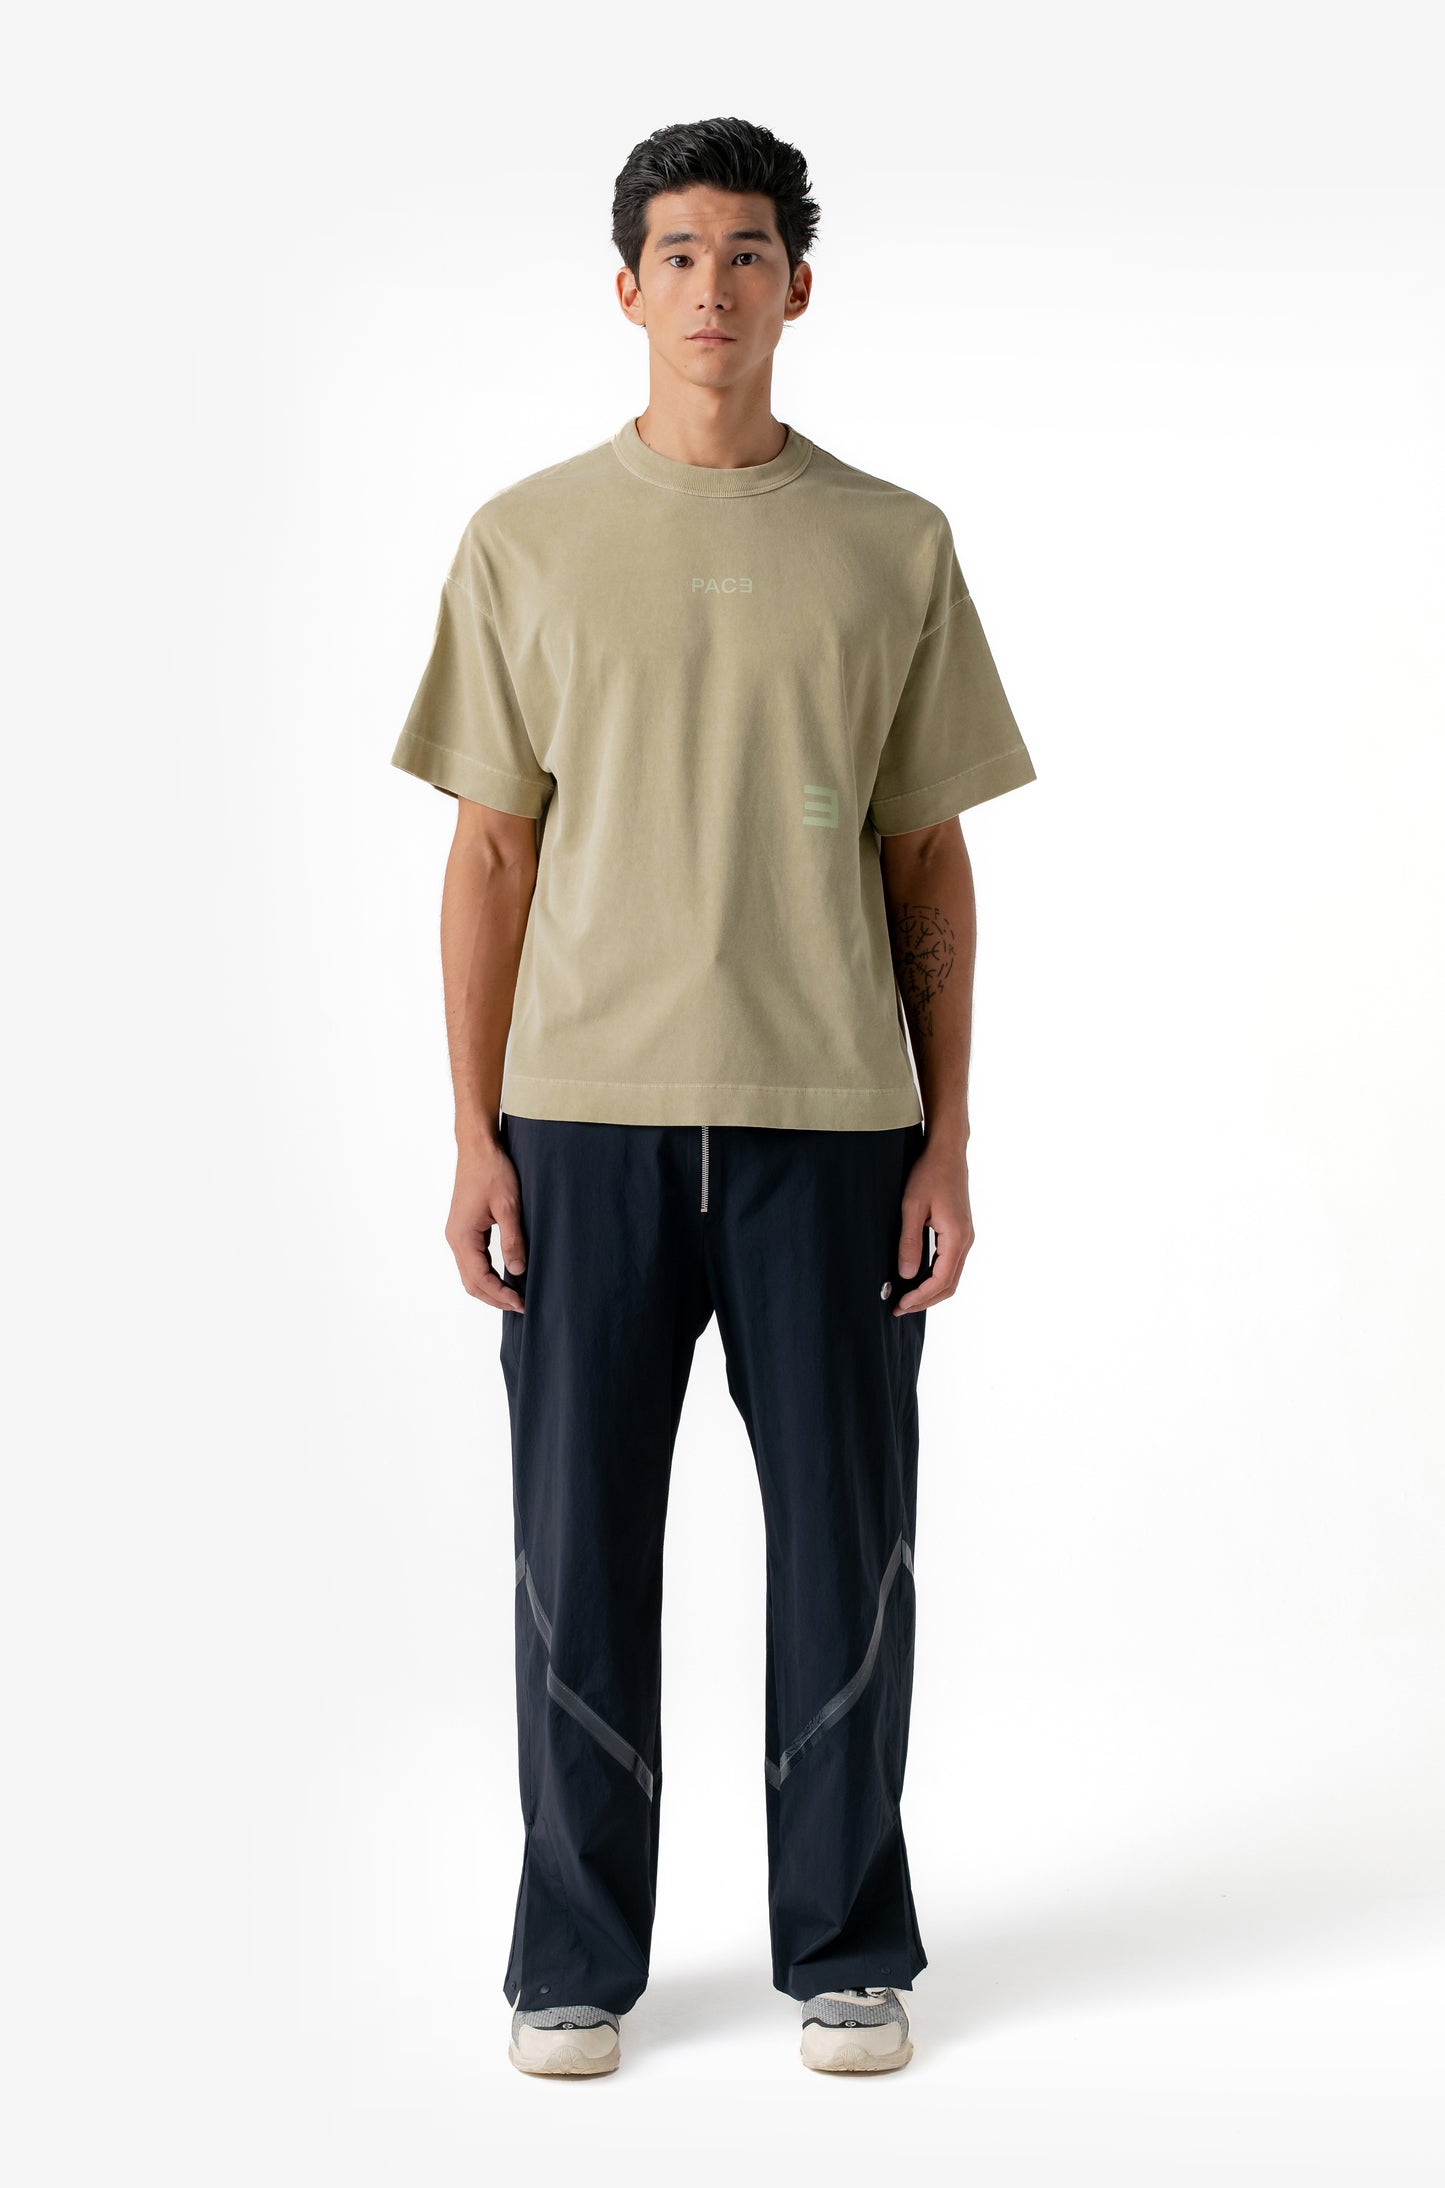 PACE - Wave Form Oversized Tee "Stone Green" - THE GAME